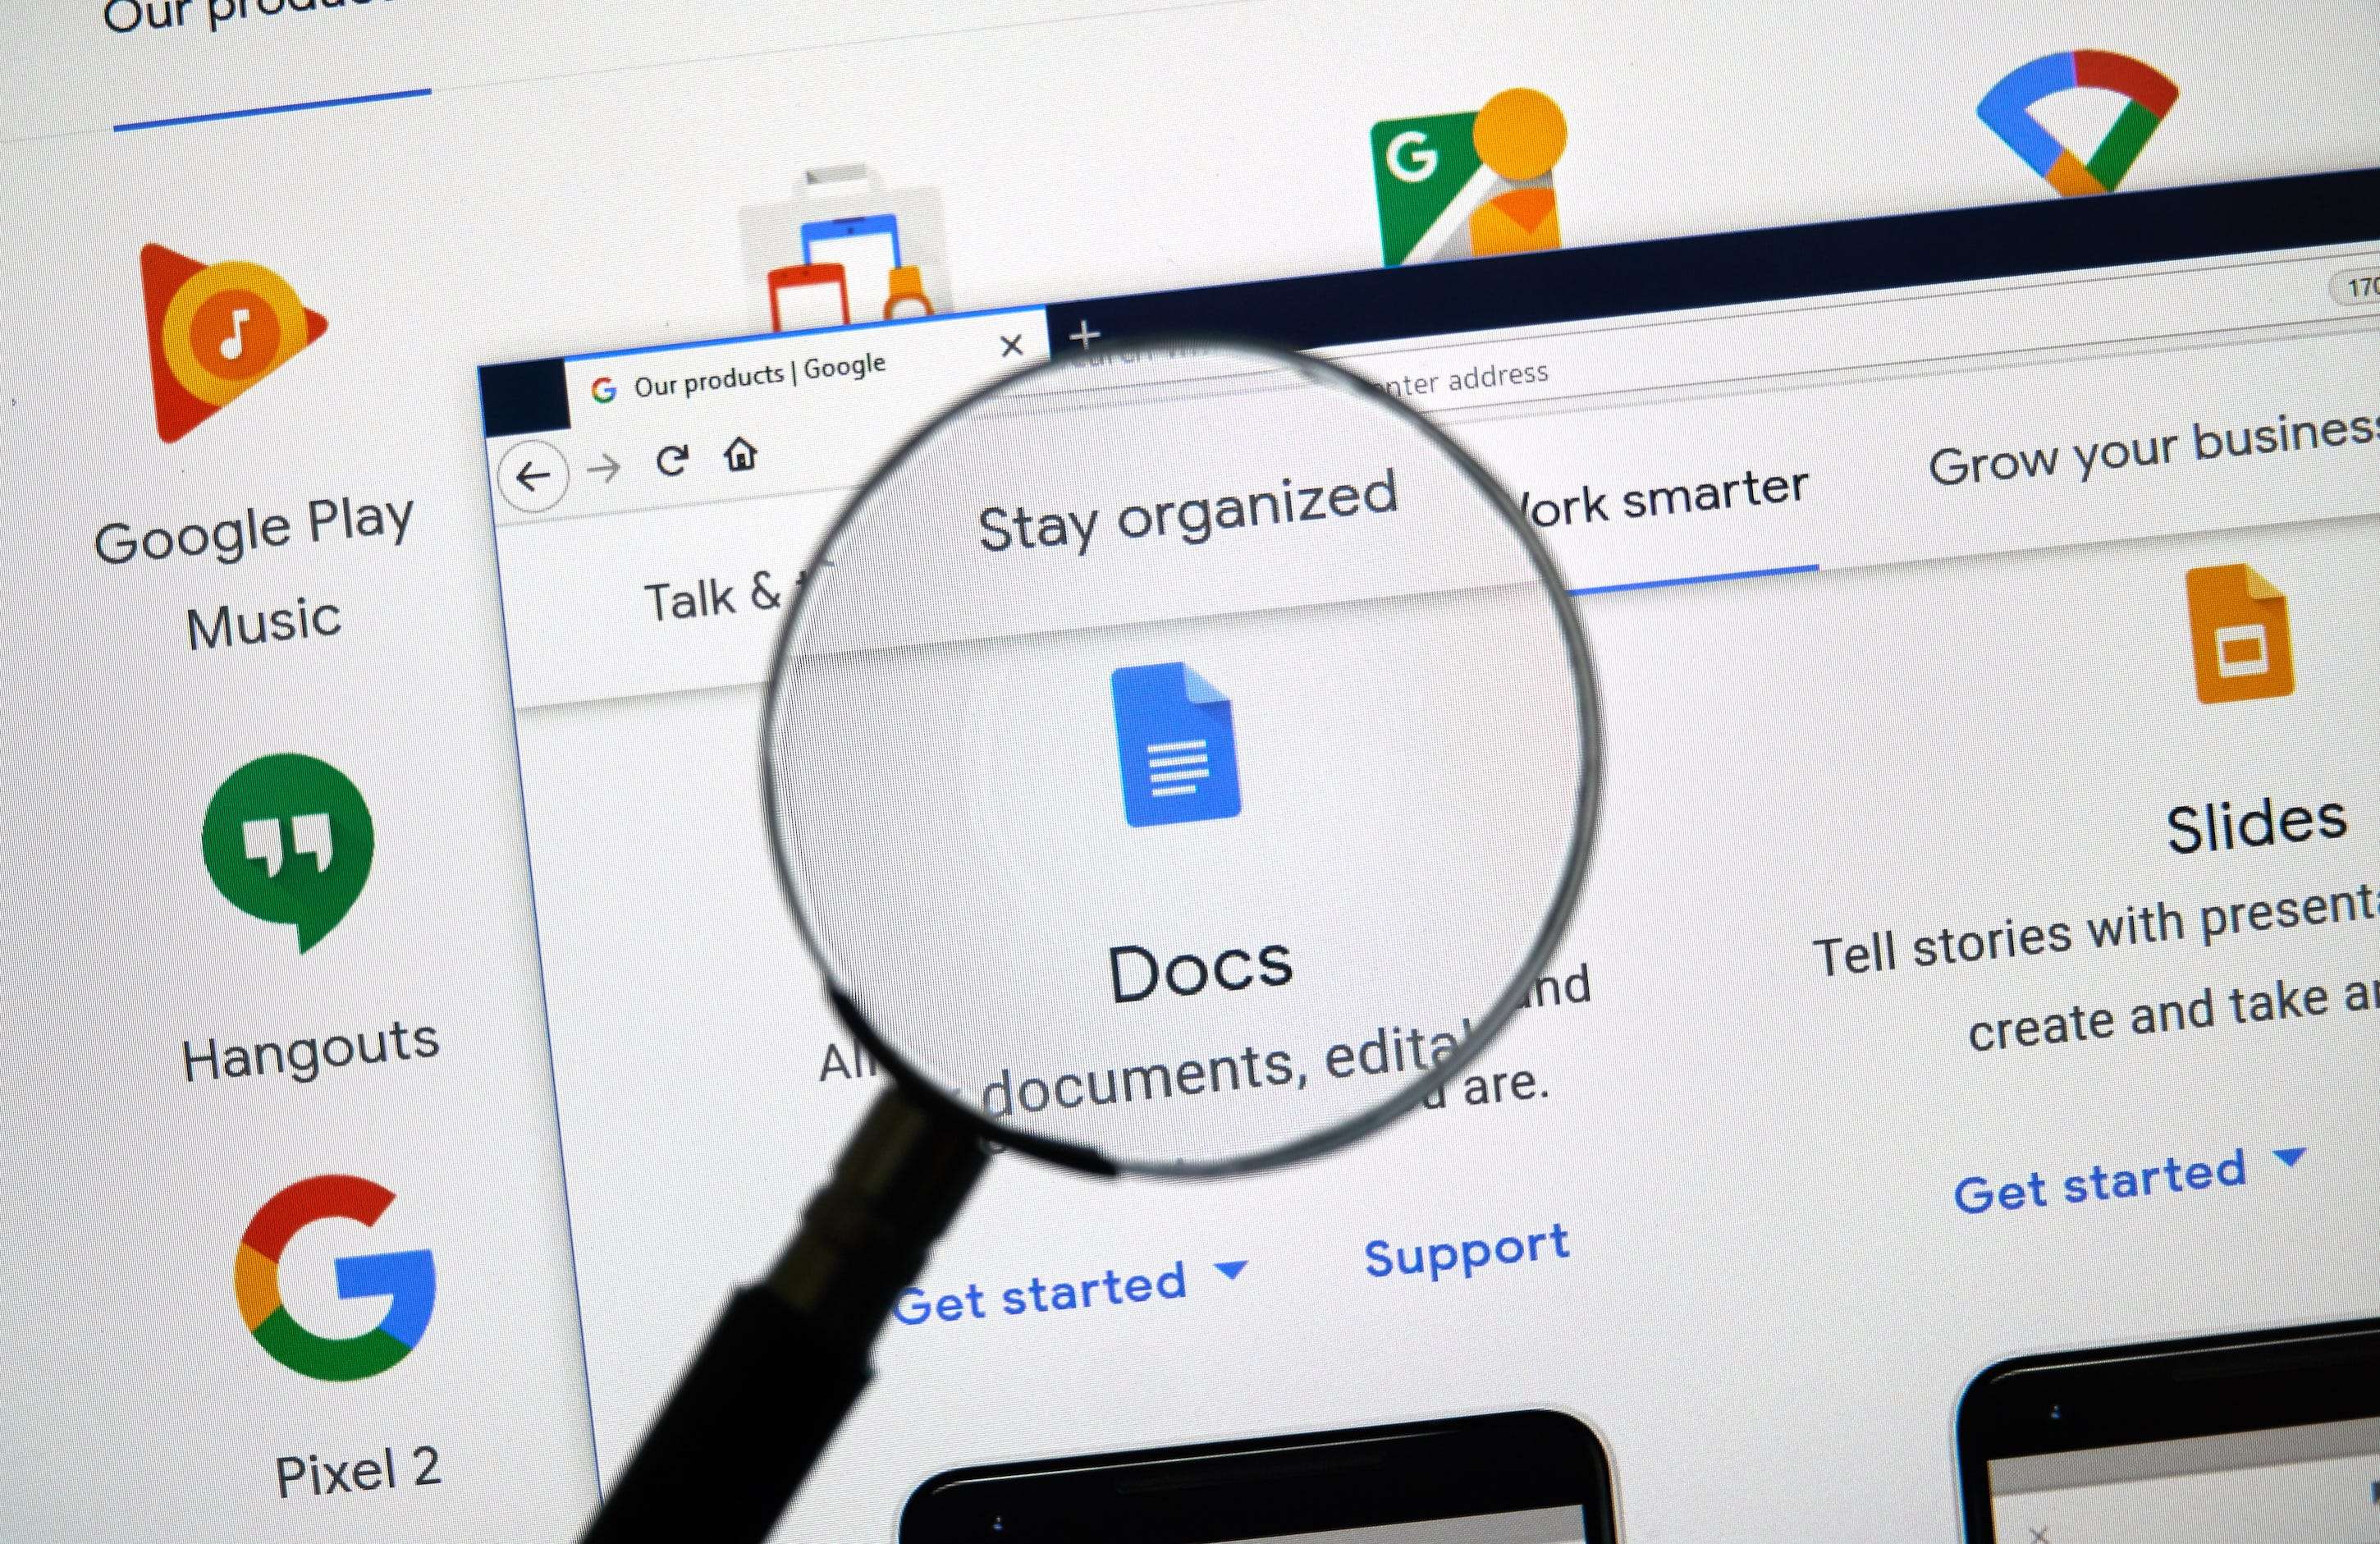 How to check your edit history on Google Docs in 3 simple steps